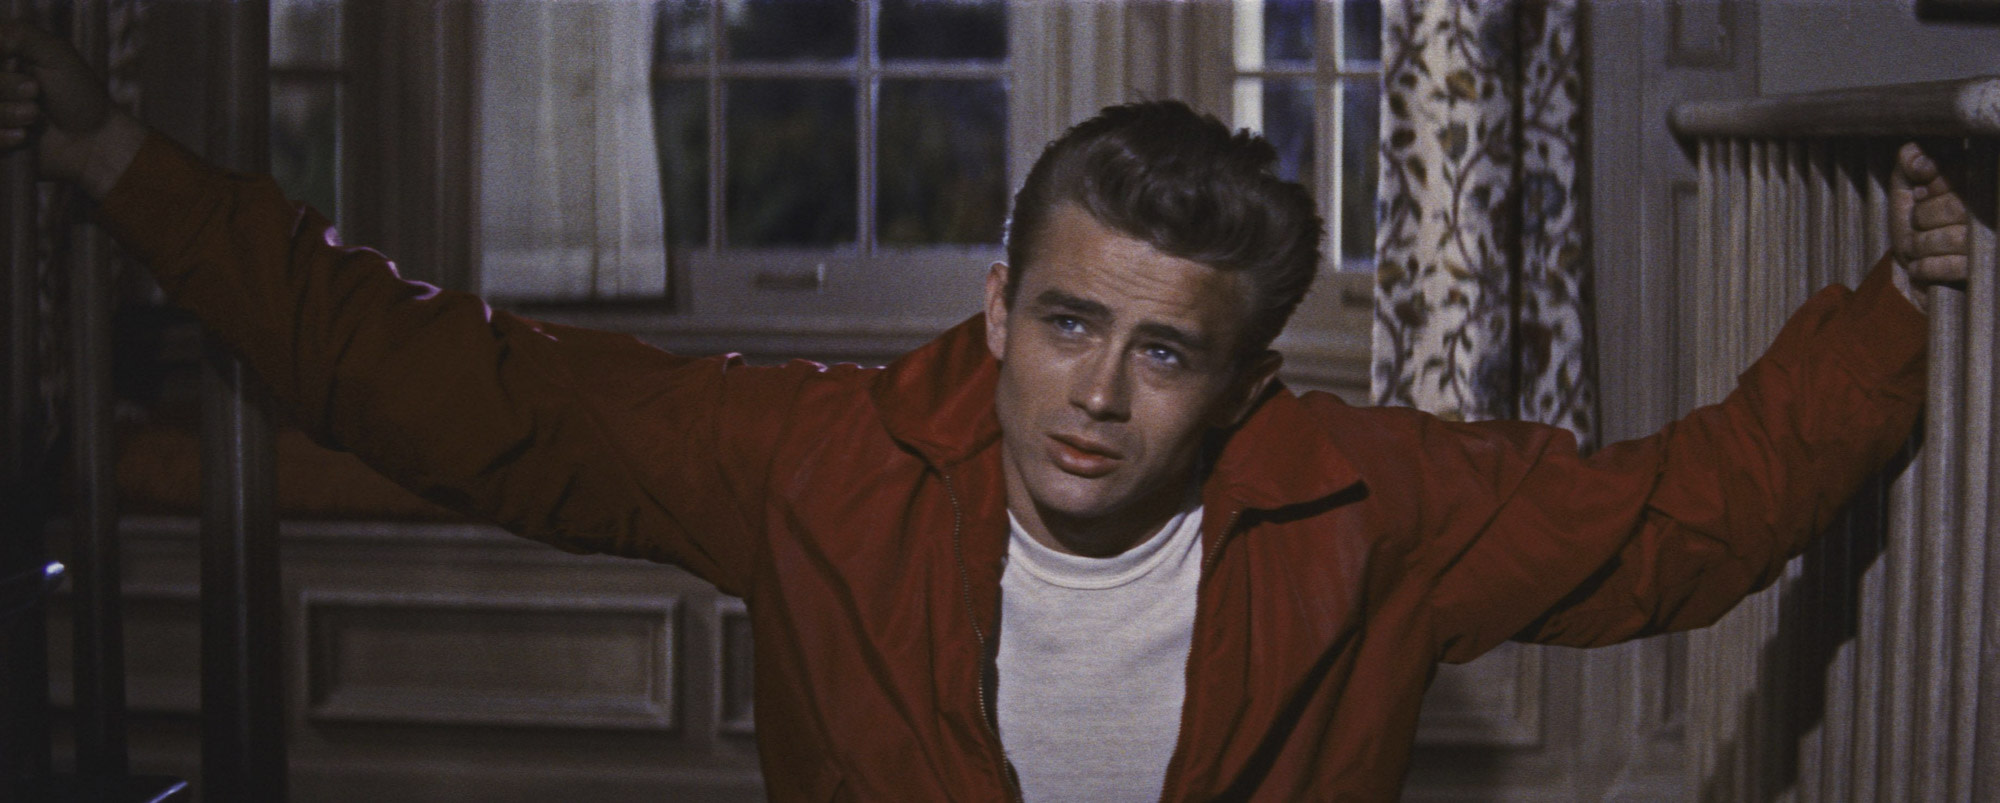 Rebel Without a Cause (1955) film still.